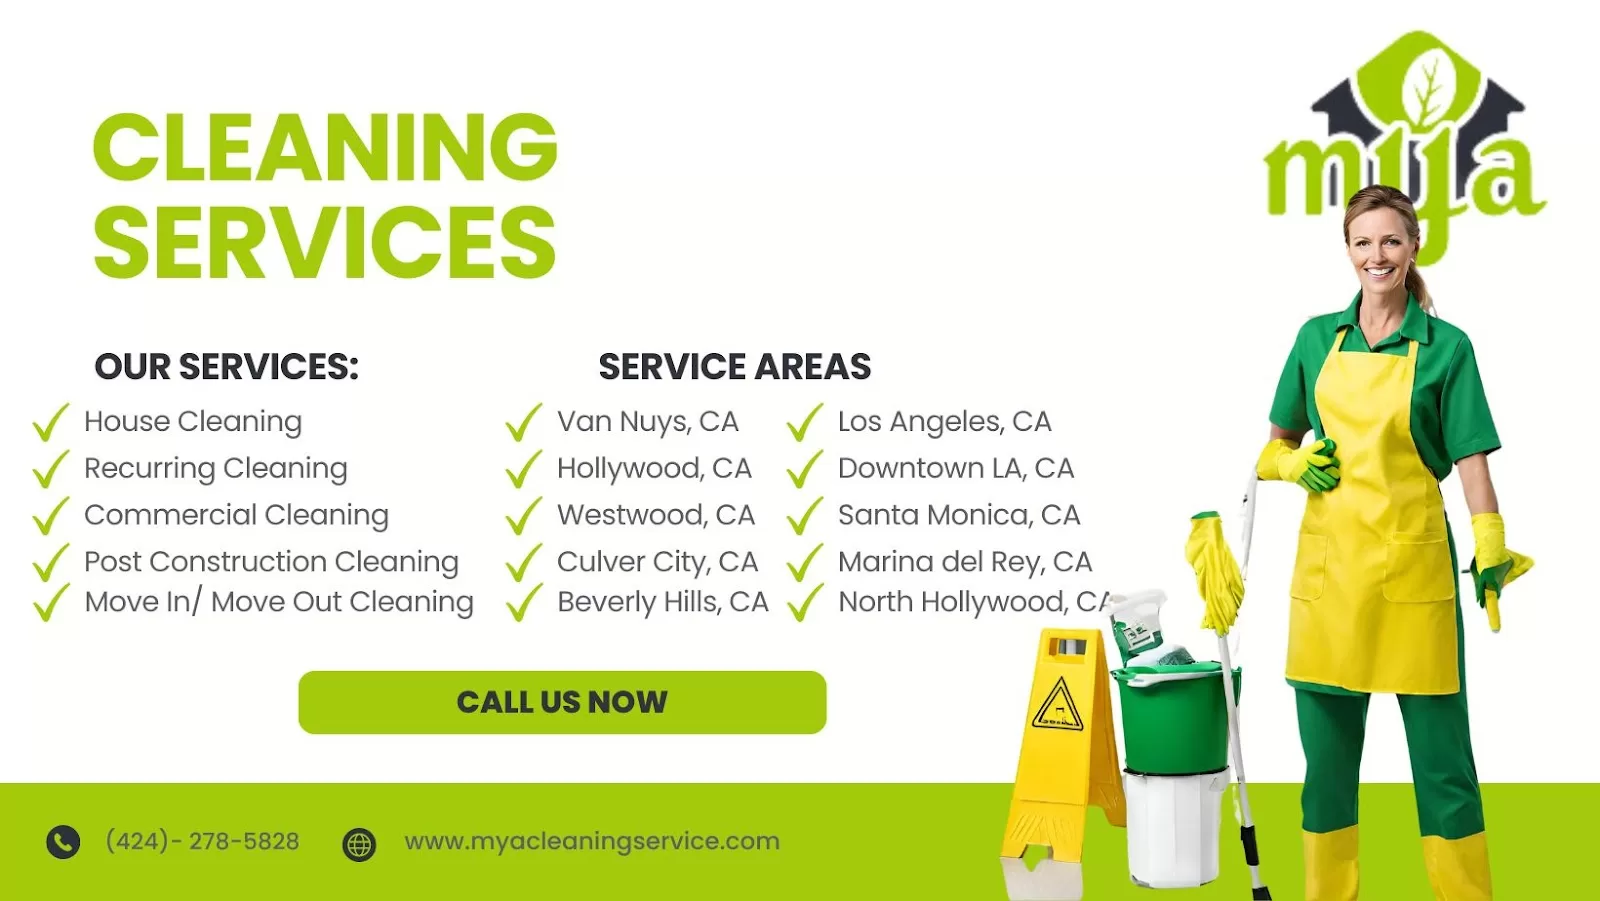 Mya Cleaning Services call now